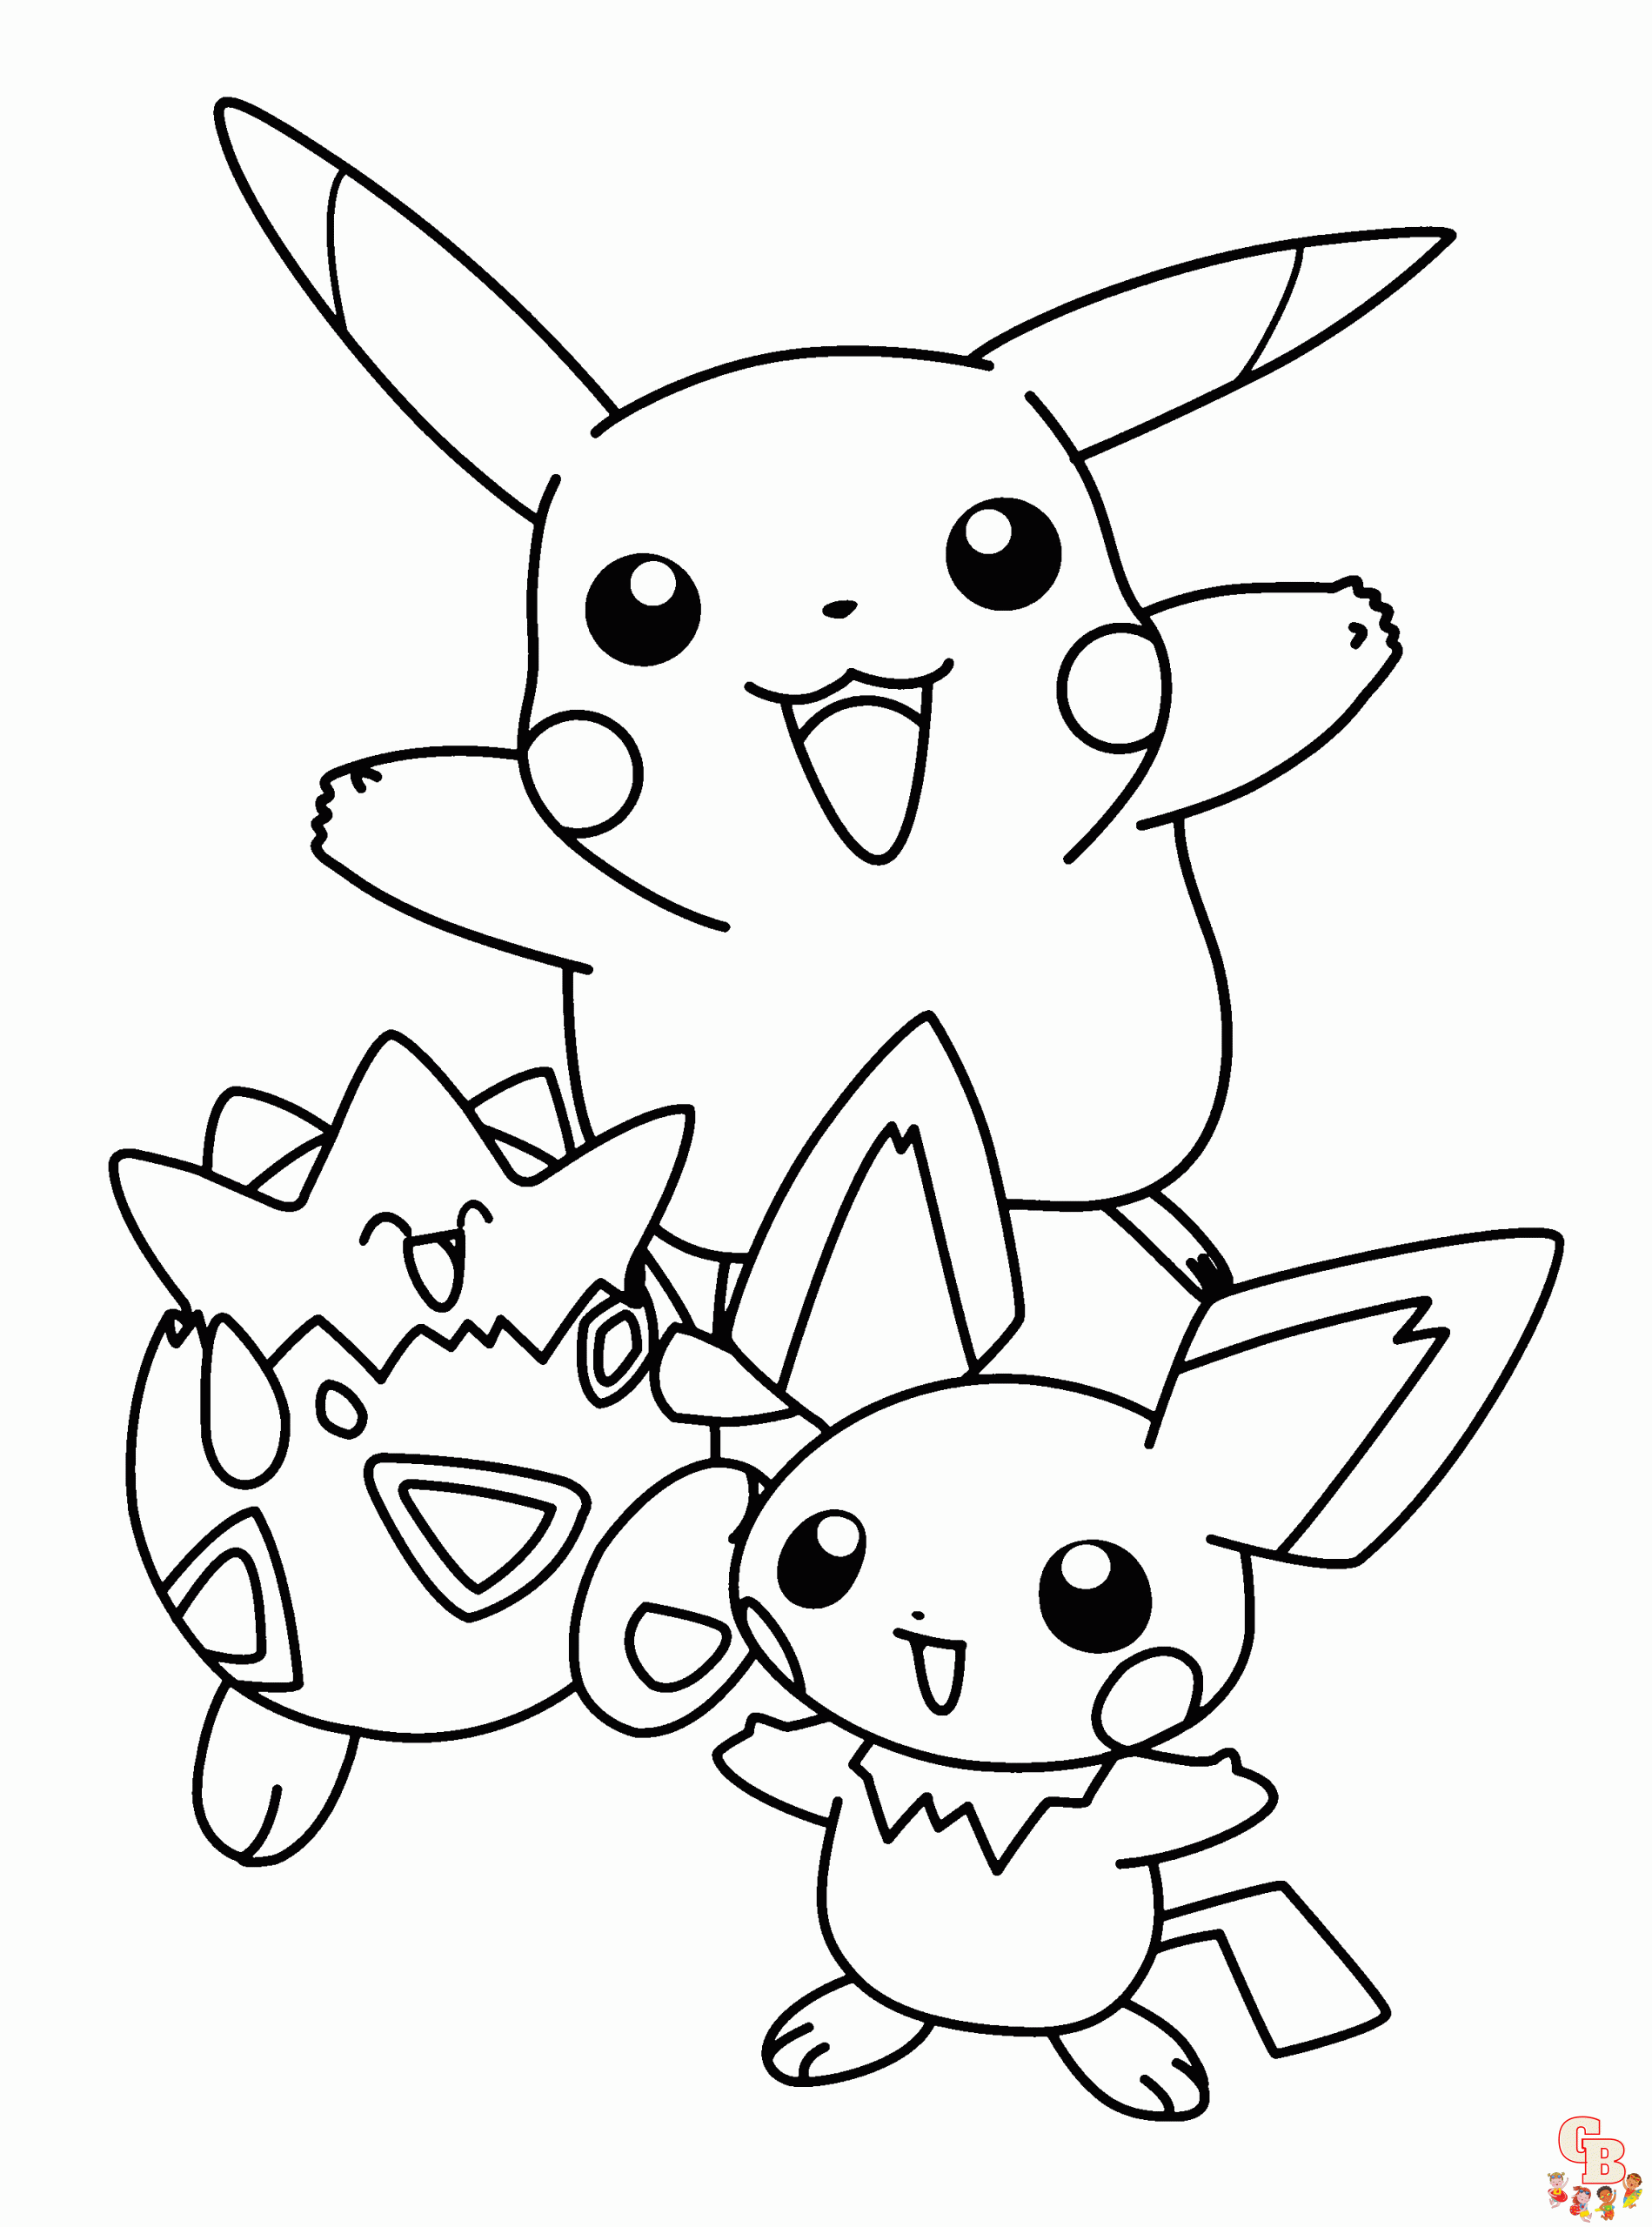 Pokemon Coloring Pages: Free Printable Sheets for Kids